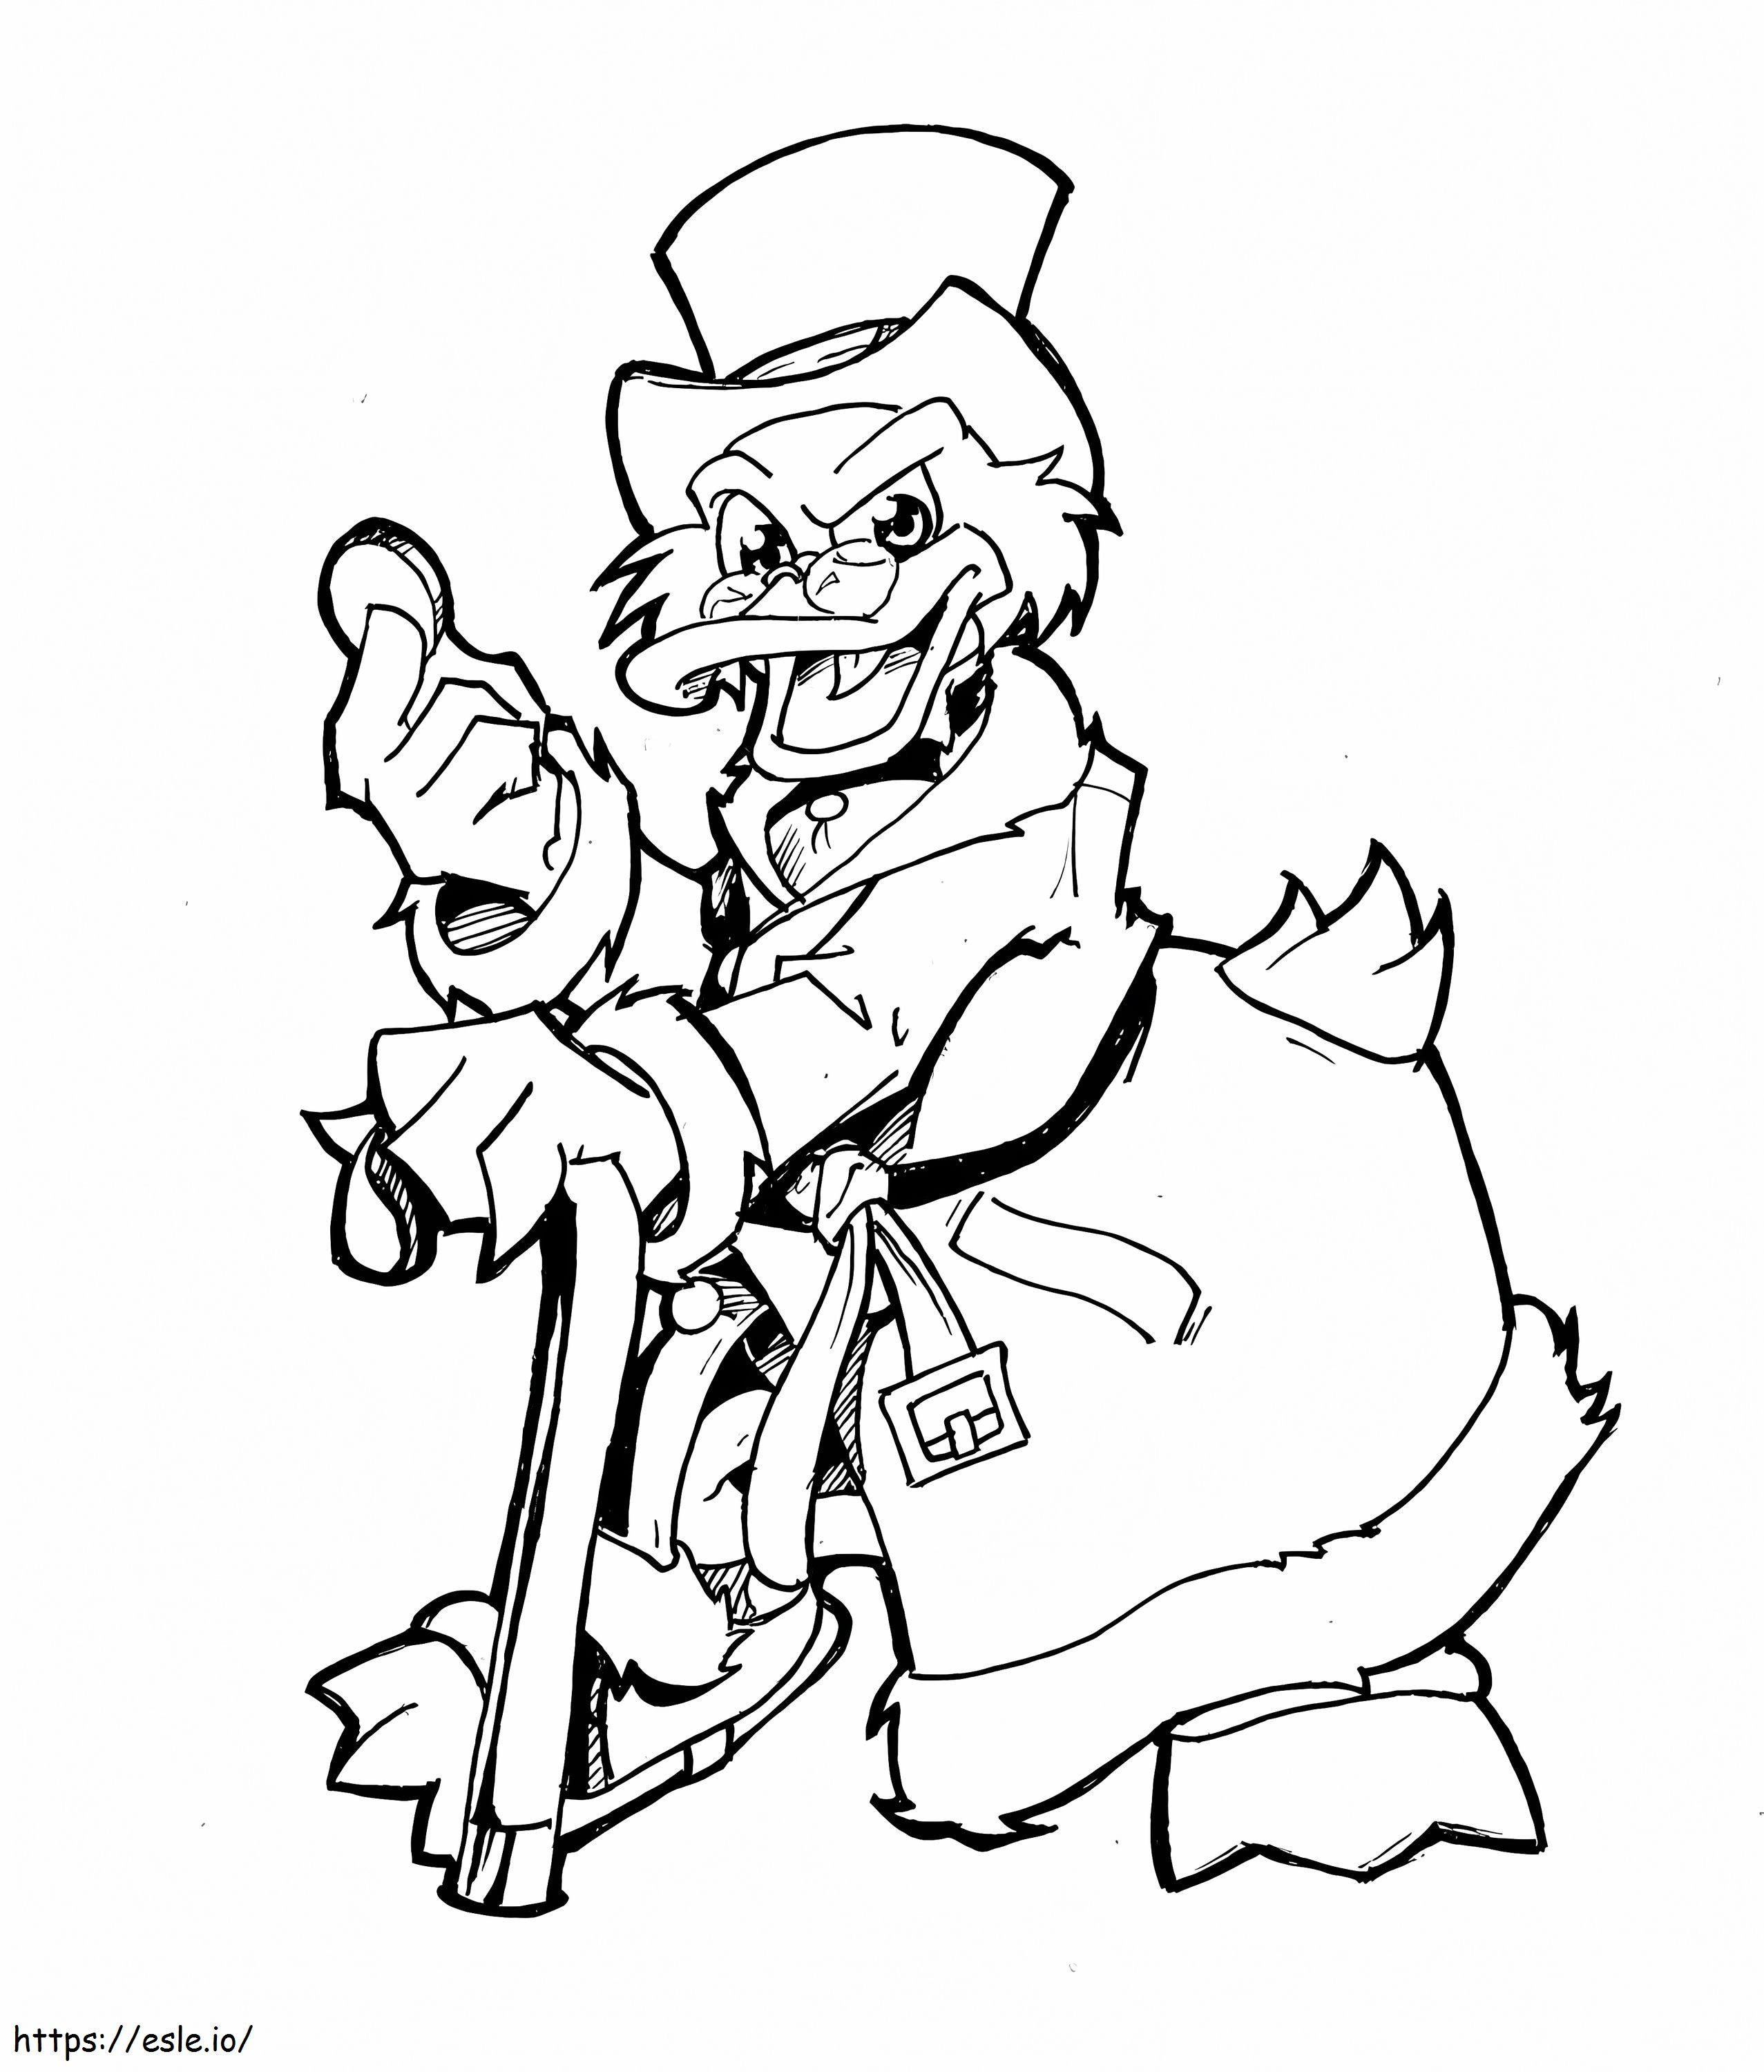 Scrooge McDuck 5 coloring page